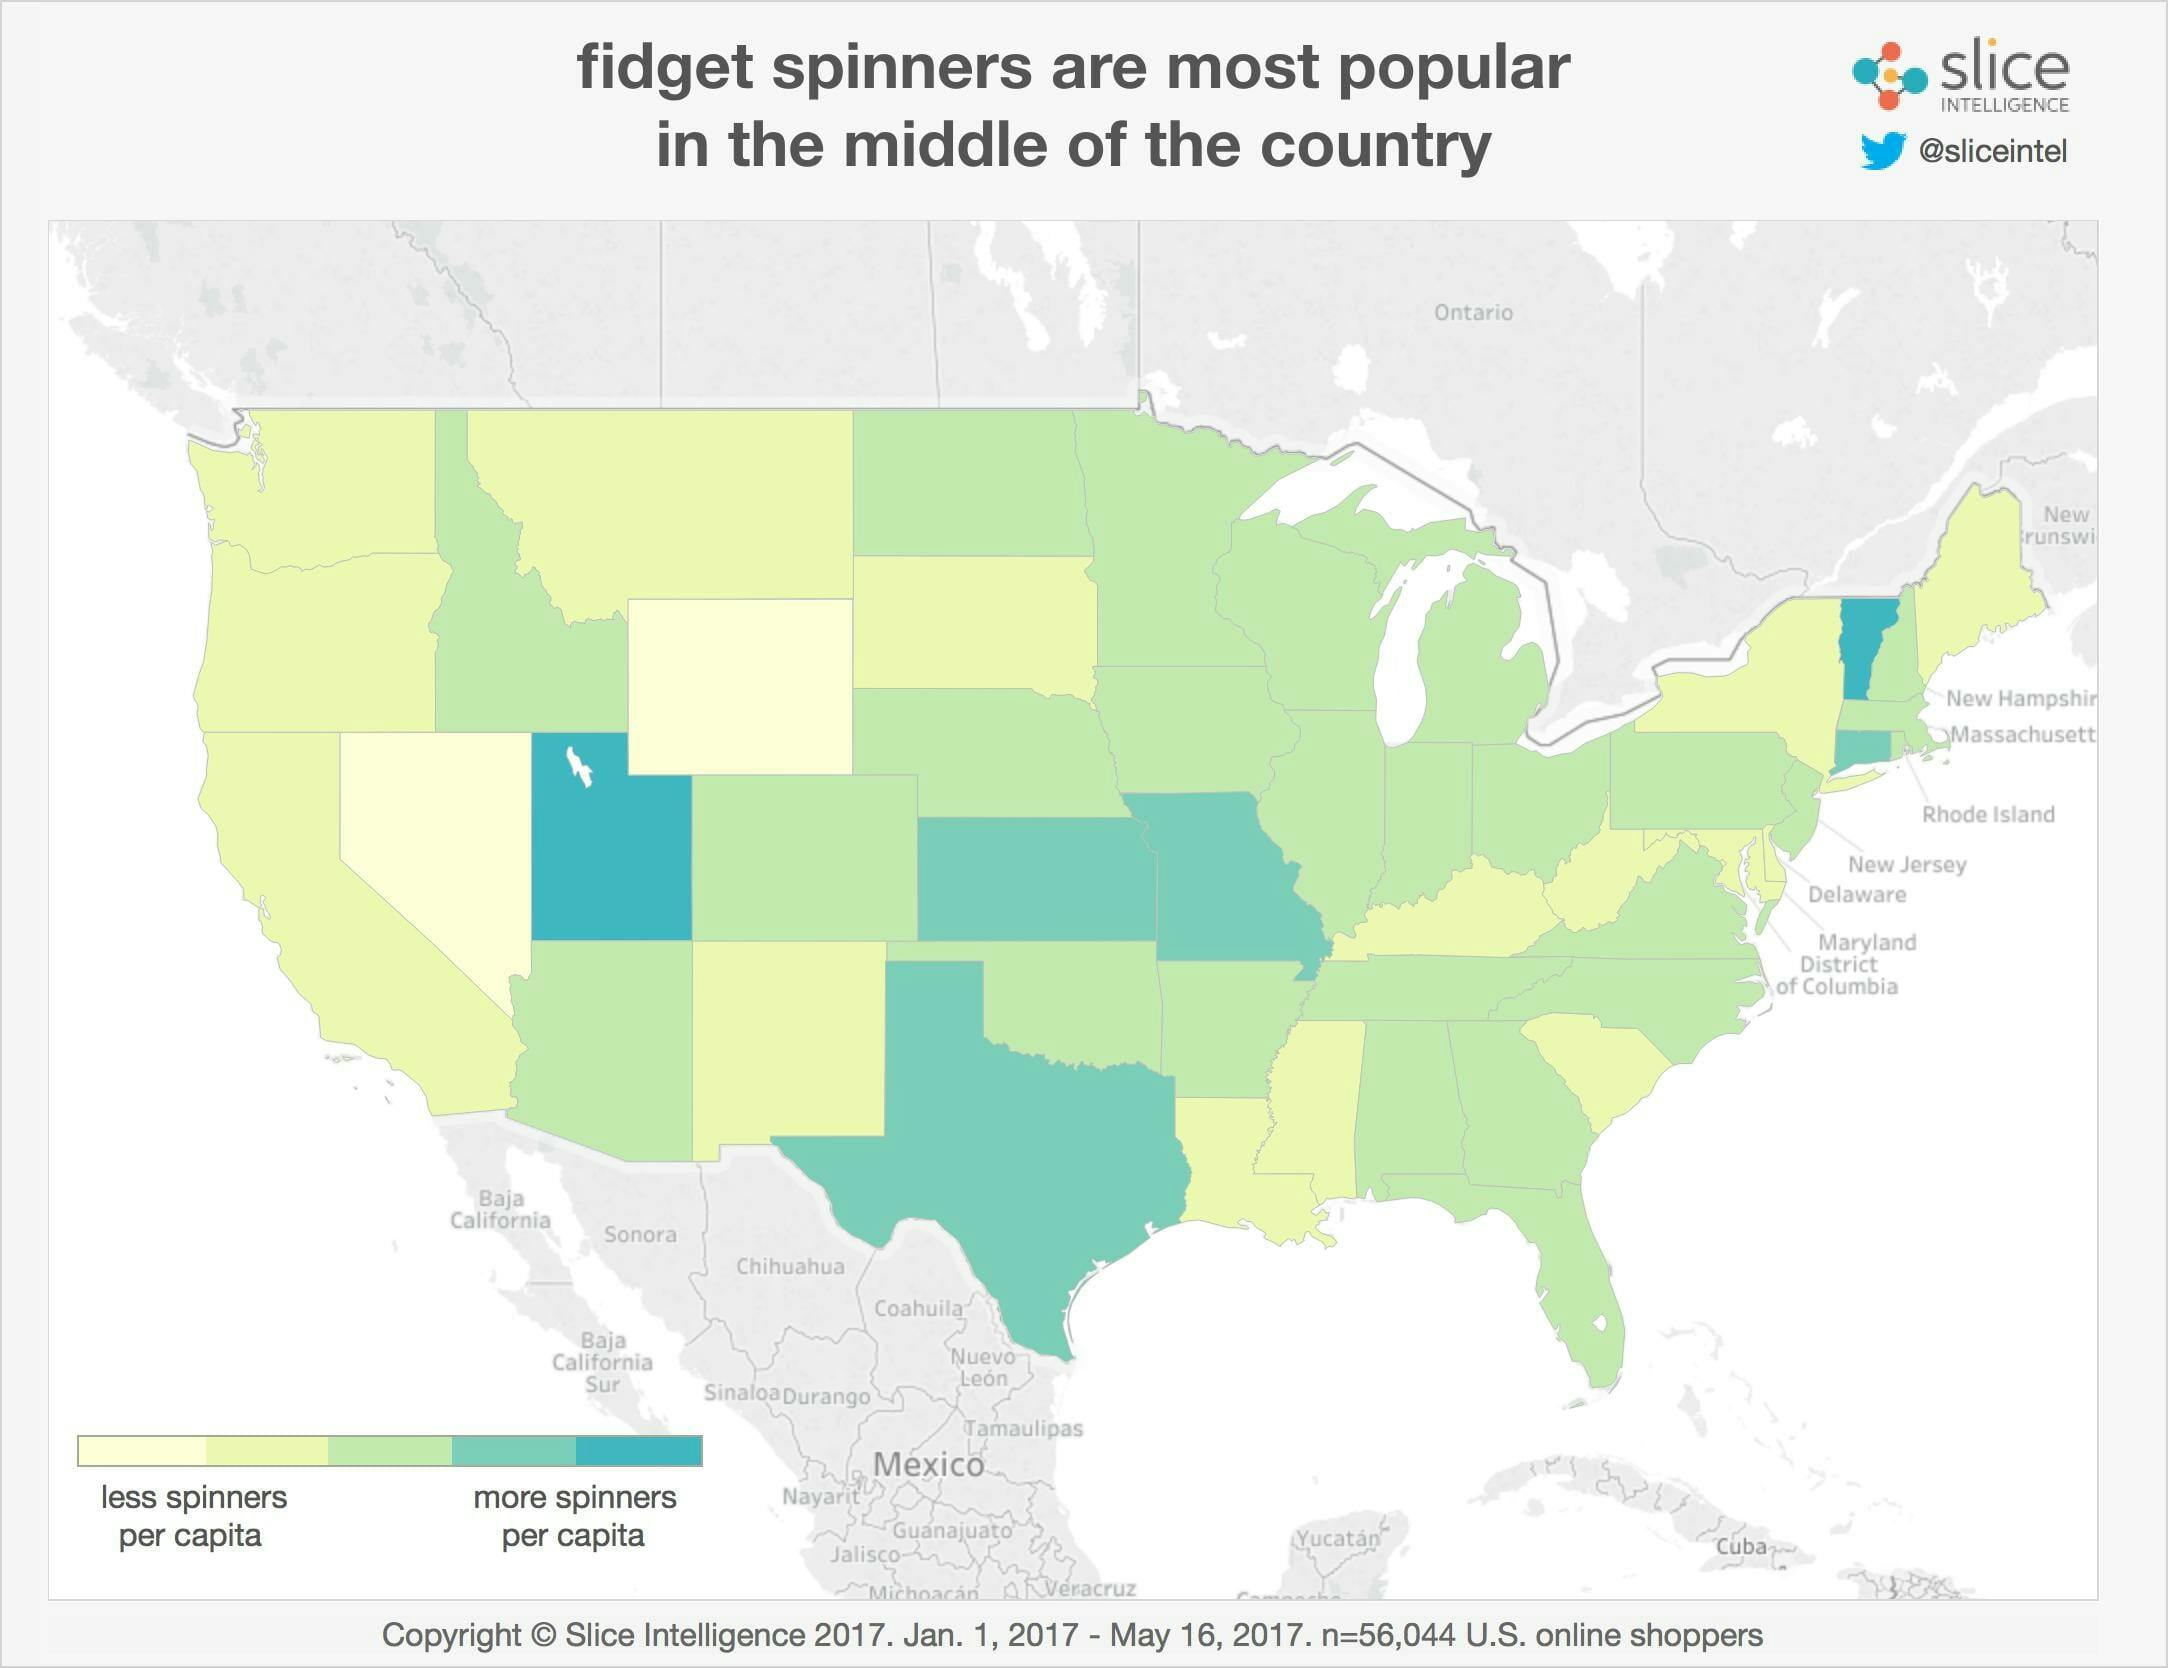 How Are Fidget Spinners in Your State? You'd Surprised